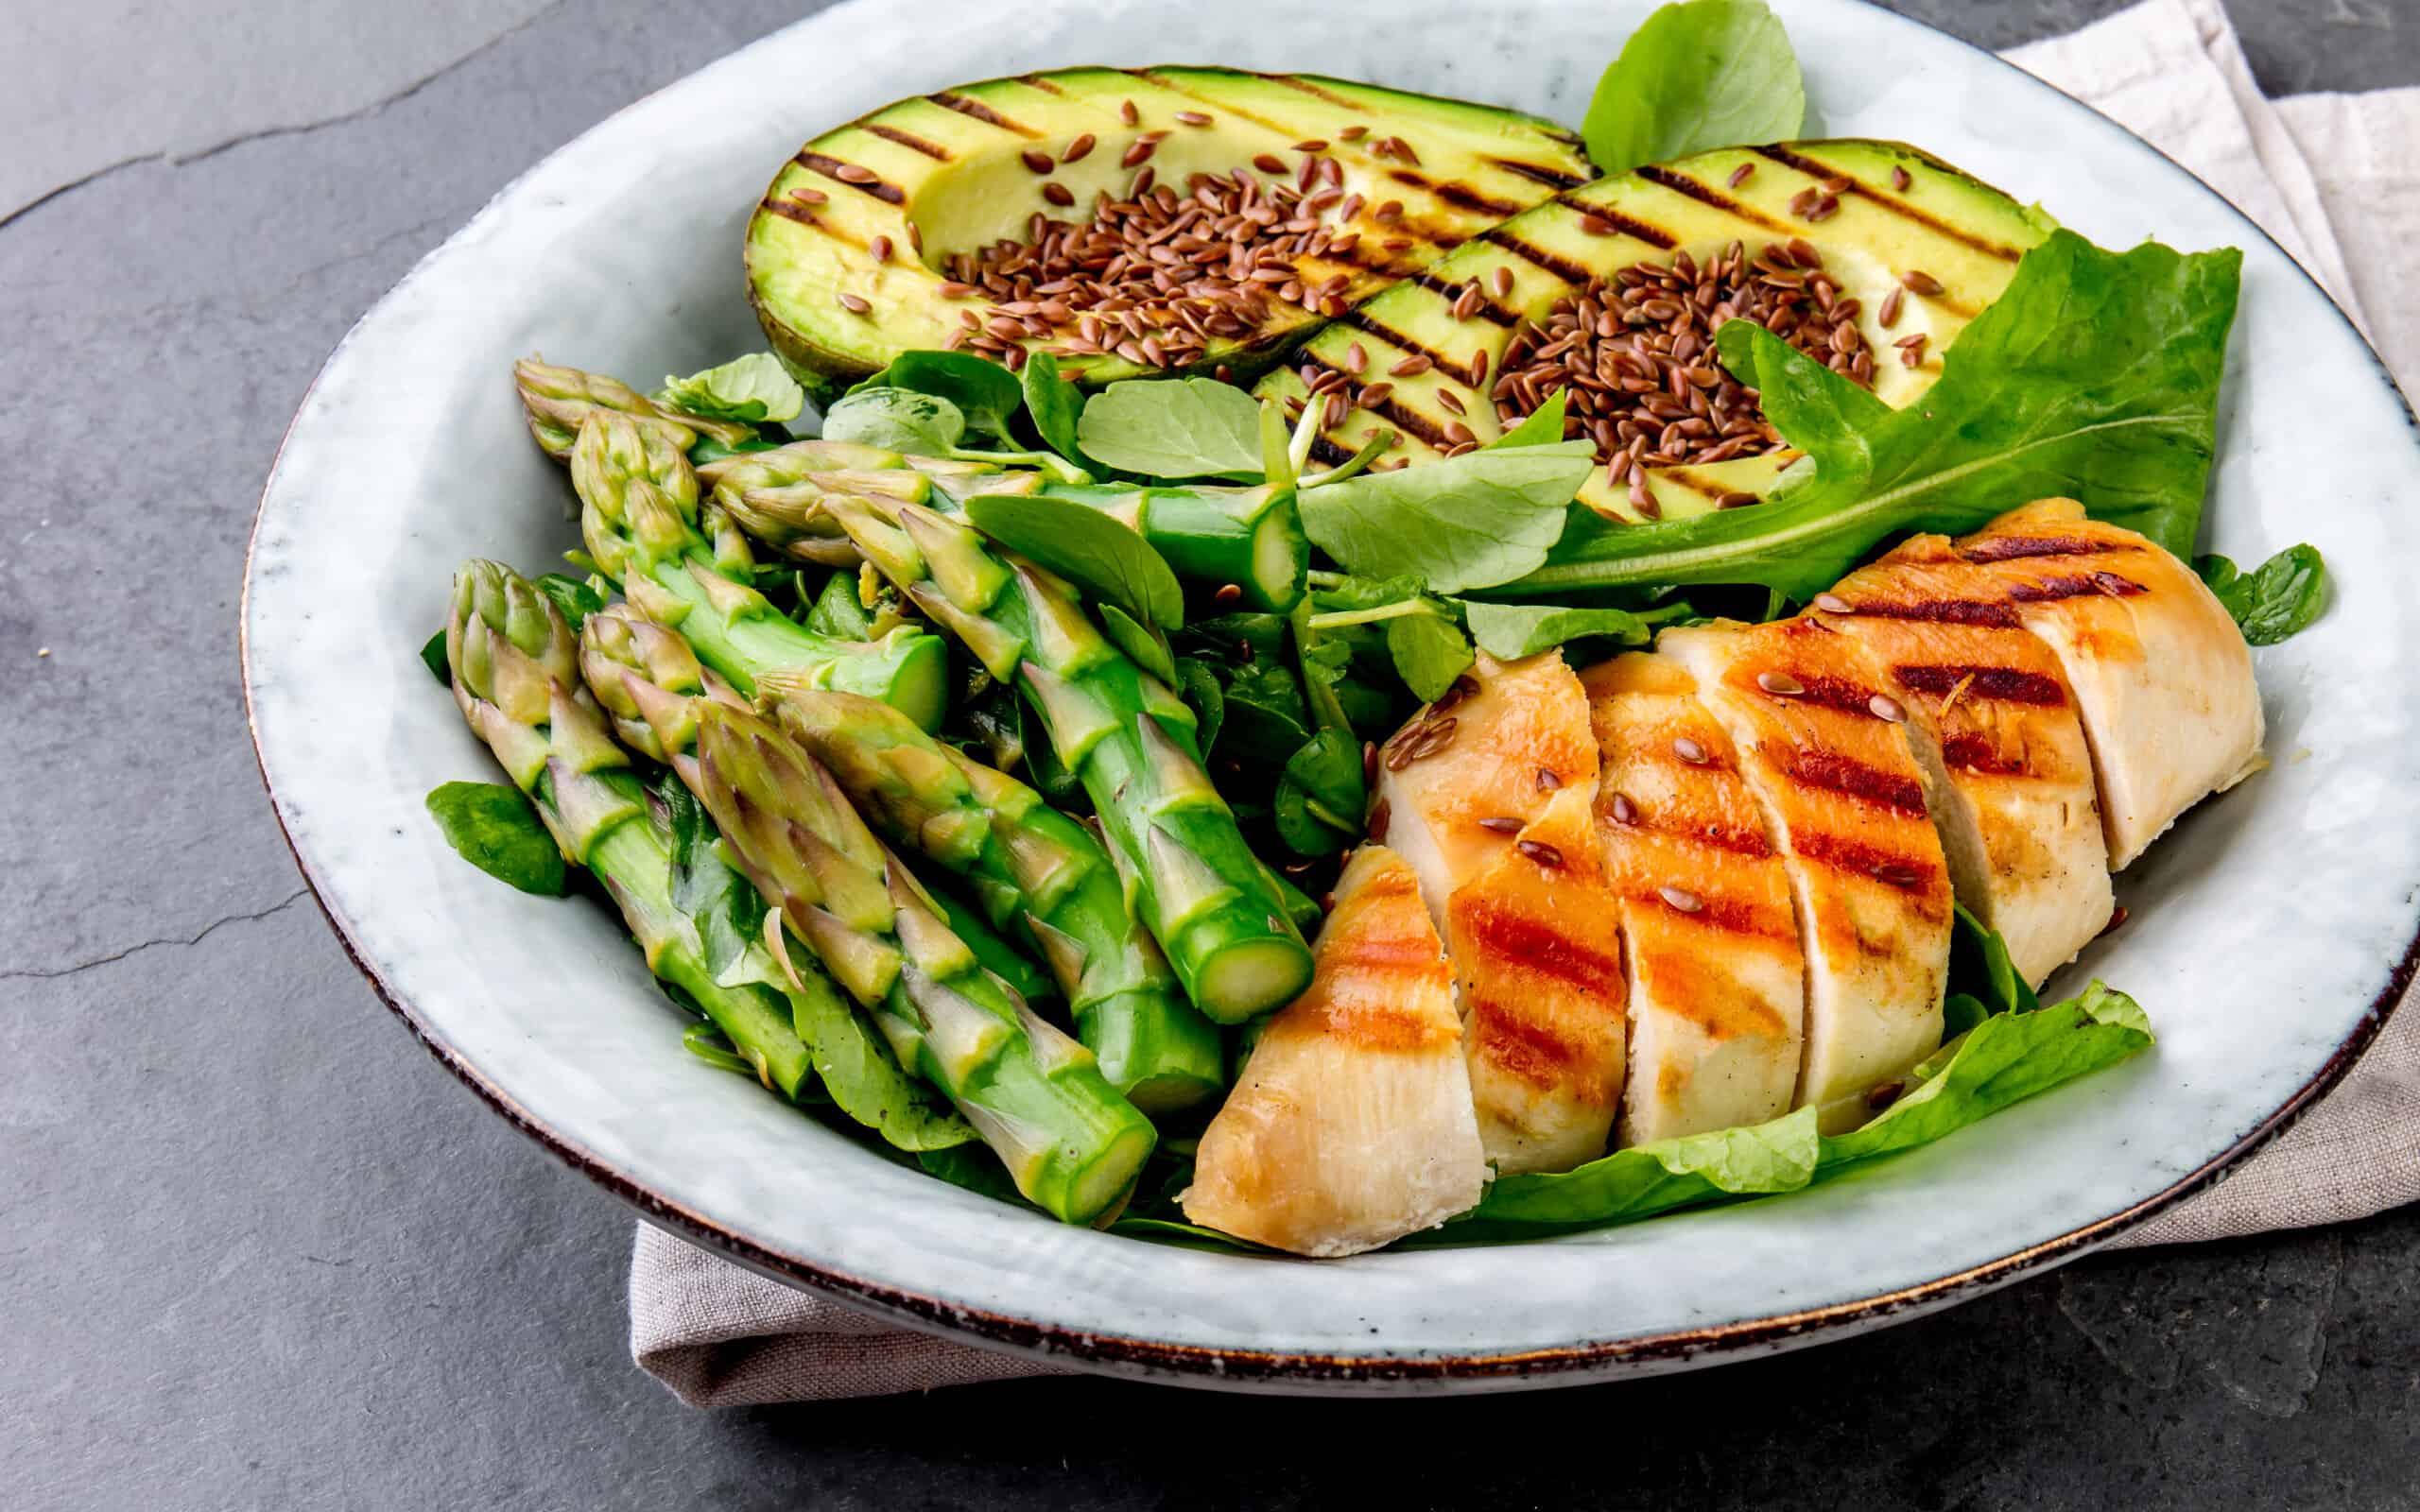 grilled avocado and asparagus salad